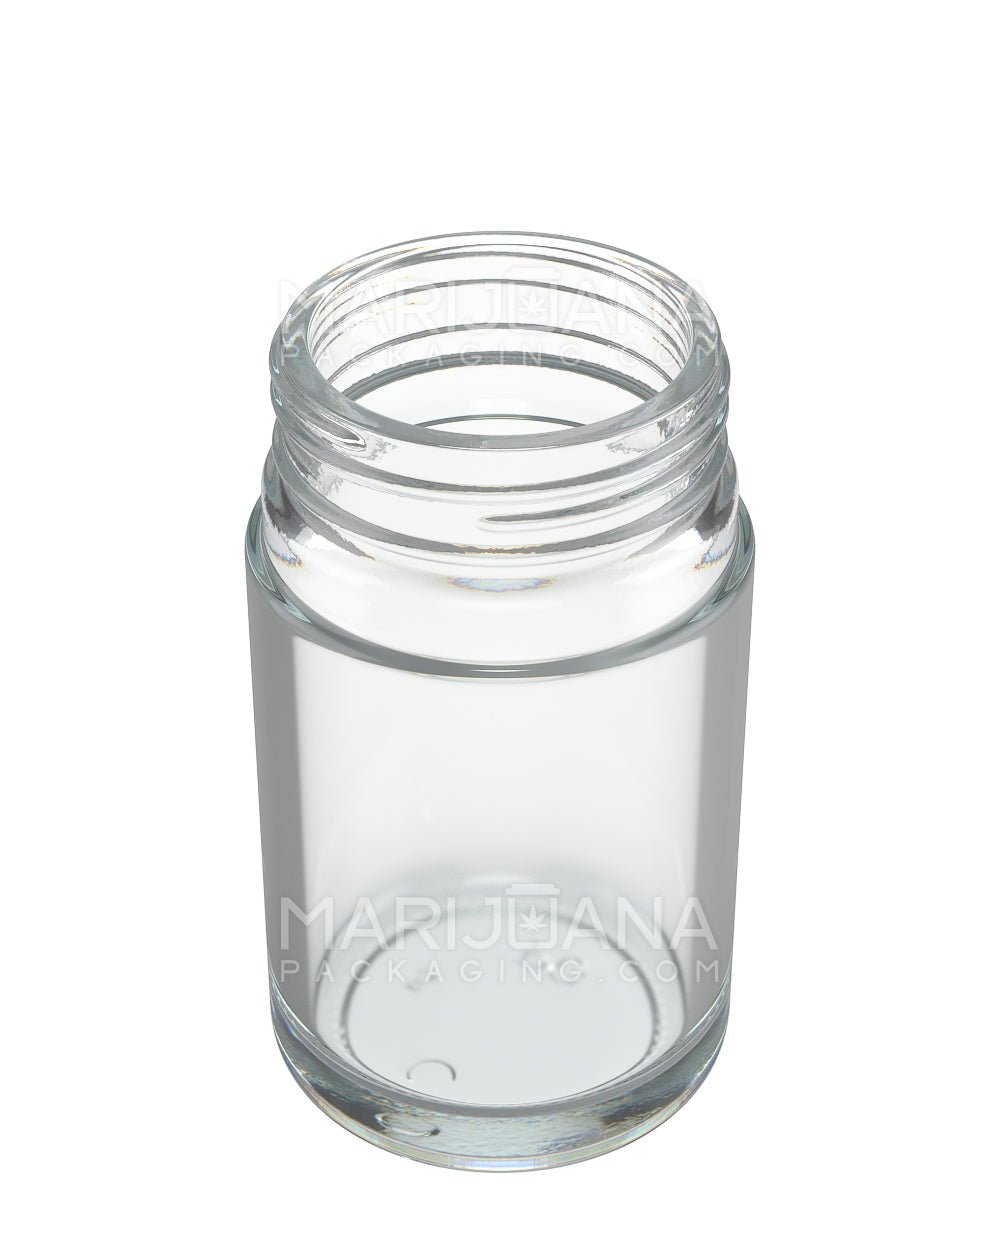 POLLEN GEAR | HiLine Straight Sided Clear Glass Jars | 45mm - 3.75oz - 72 Count - 2